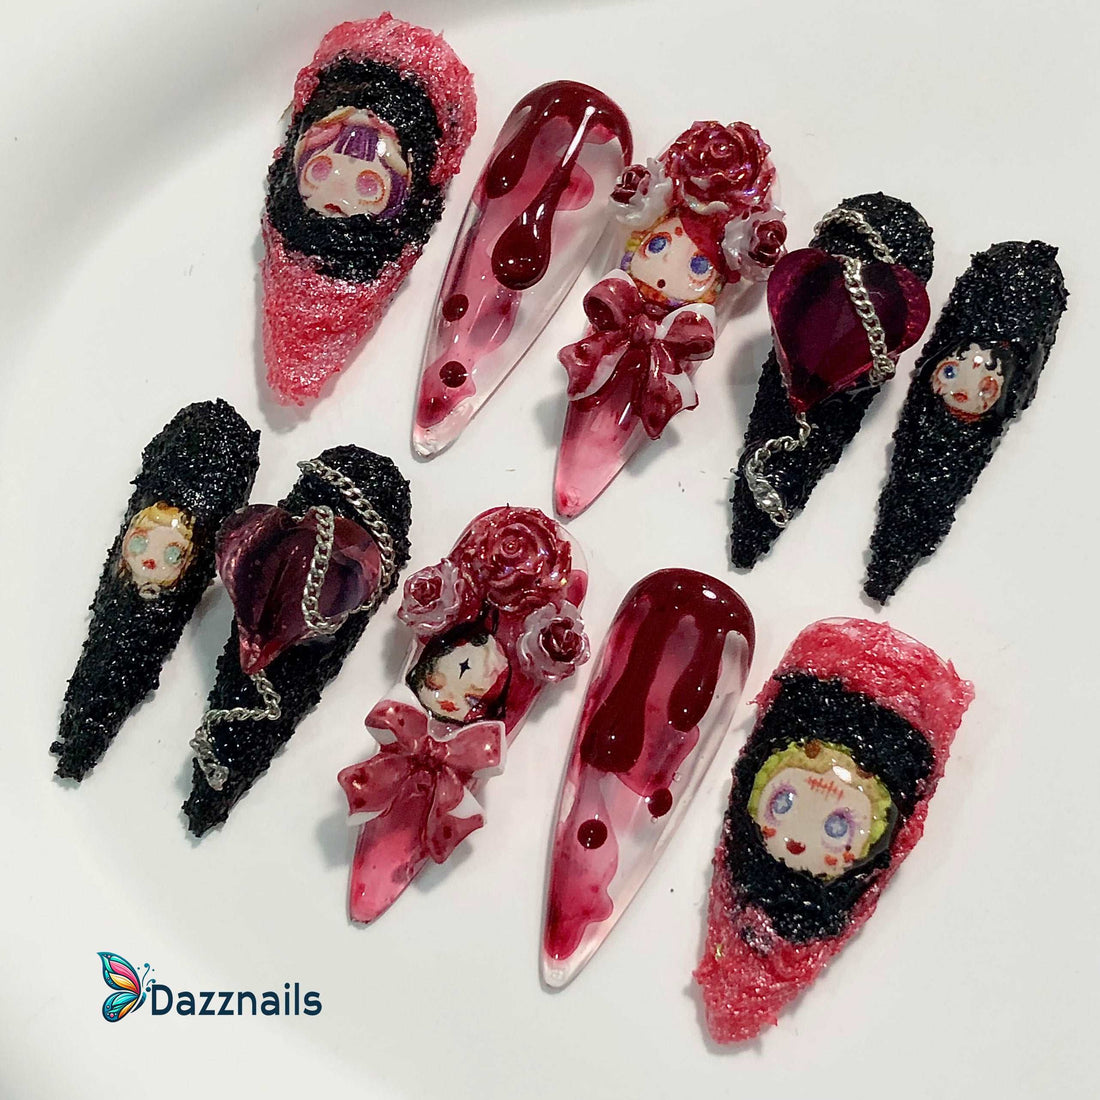 Handmade Halloween Press on Nails - 3D Gothic Doll Red Heart Design.